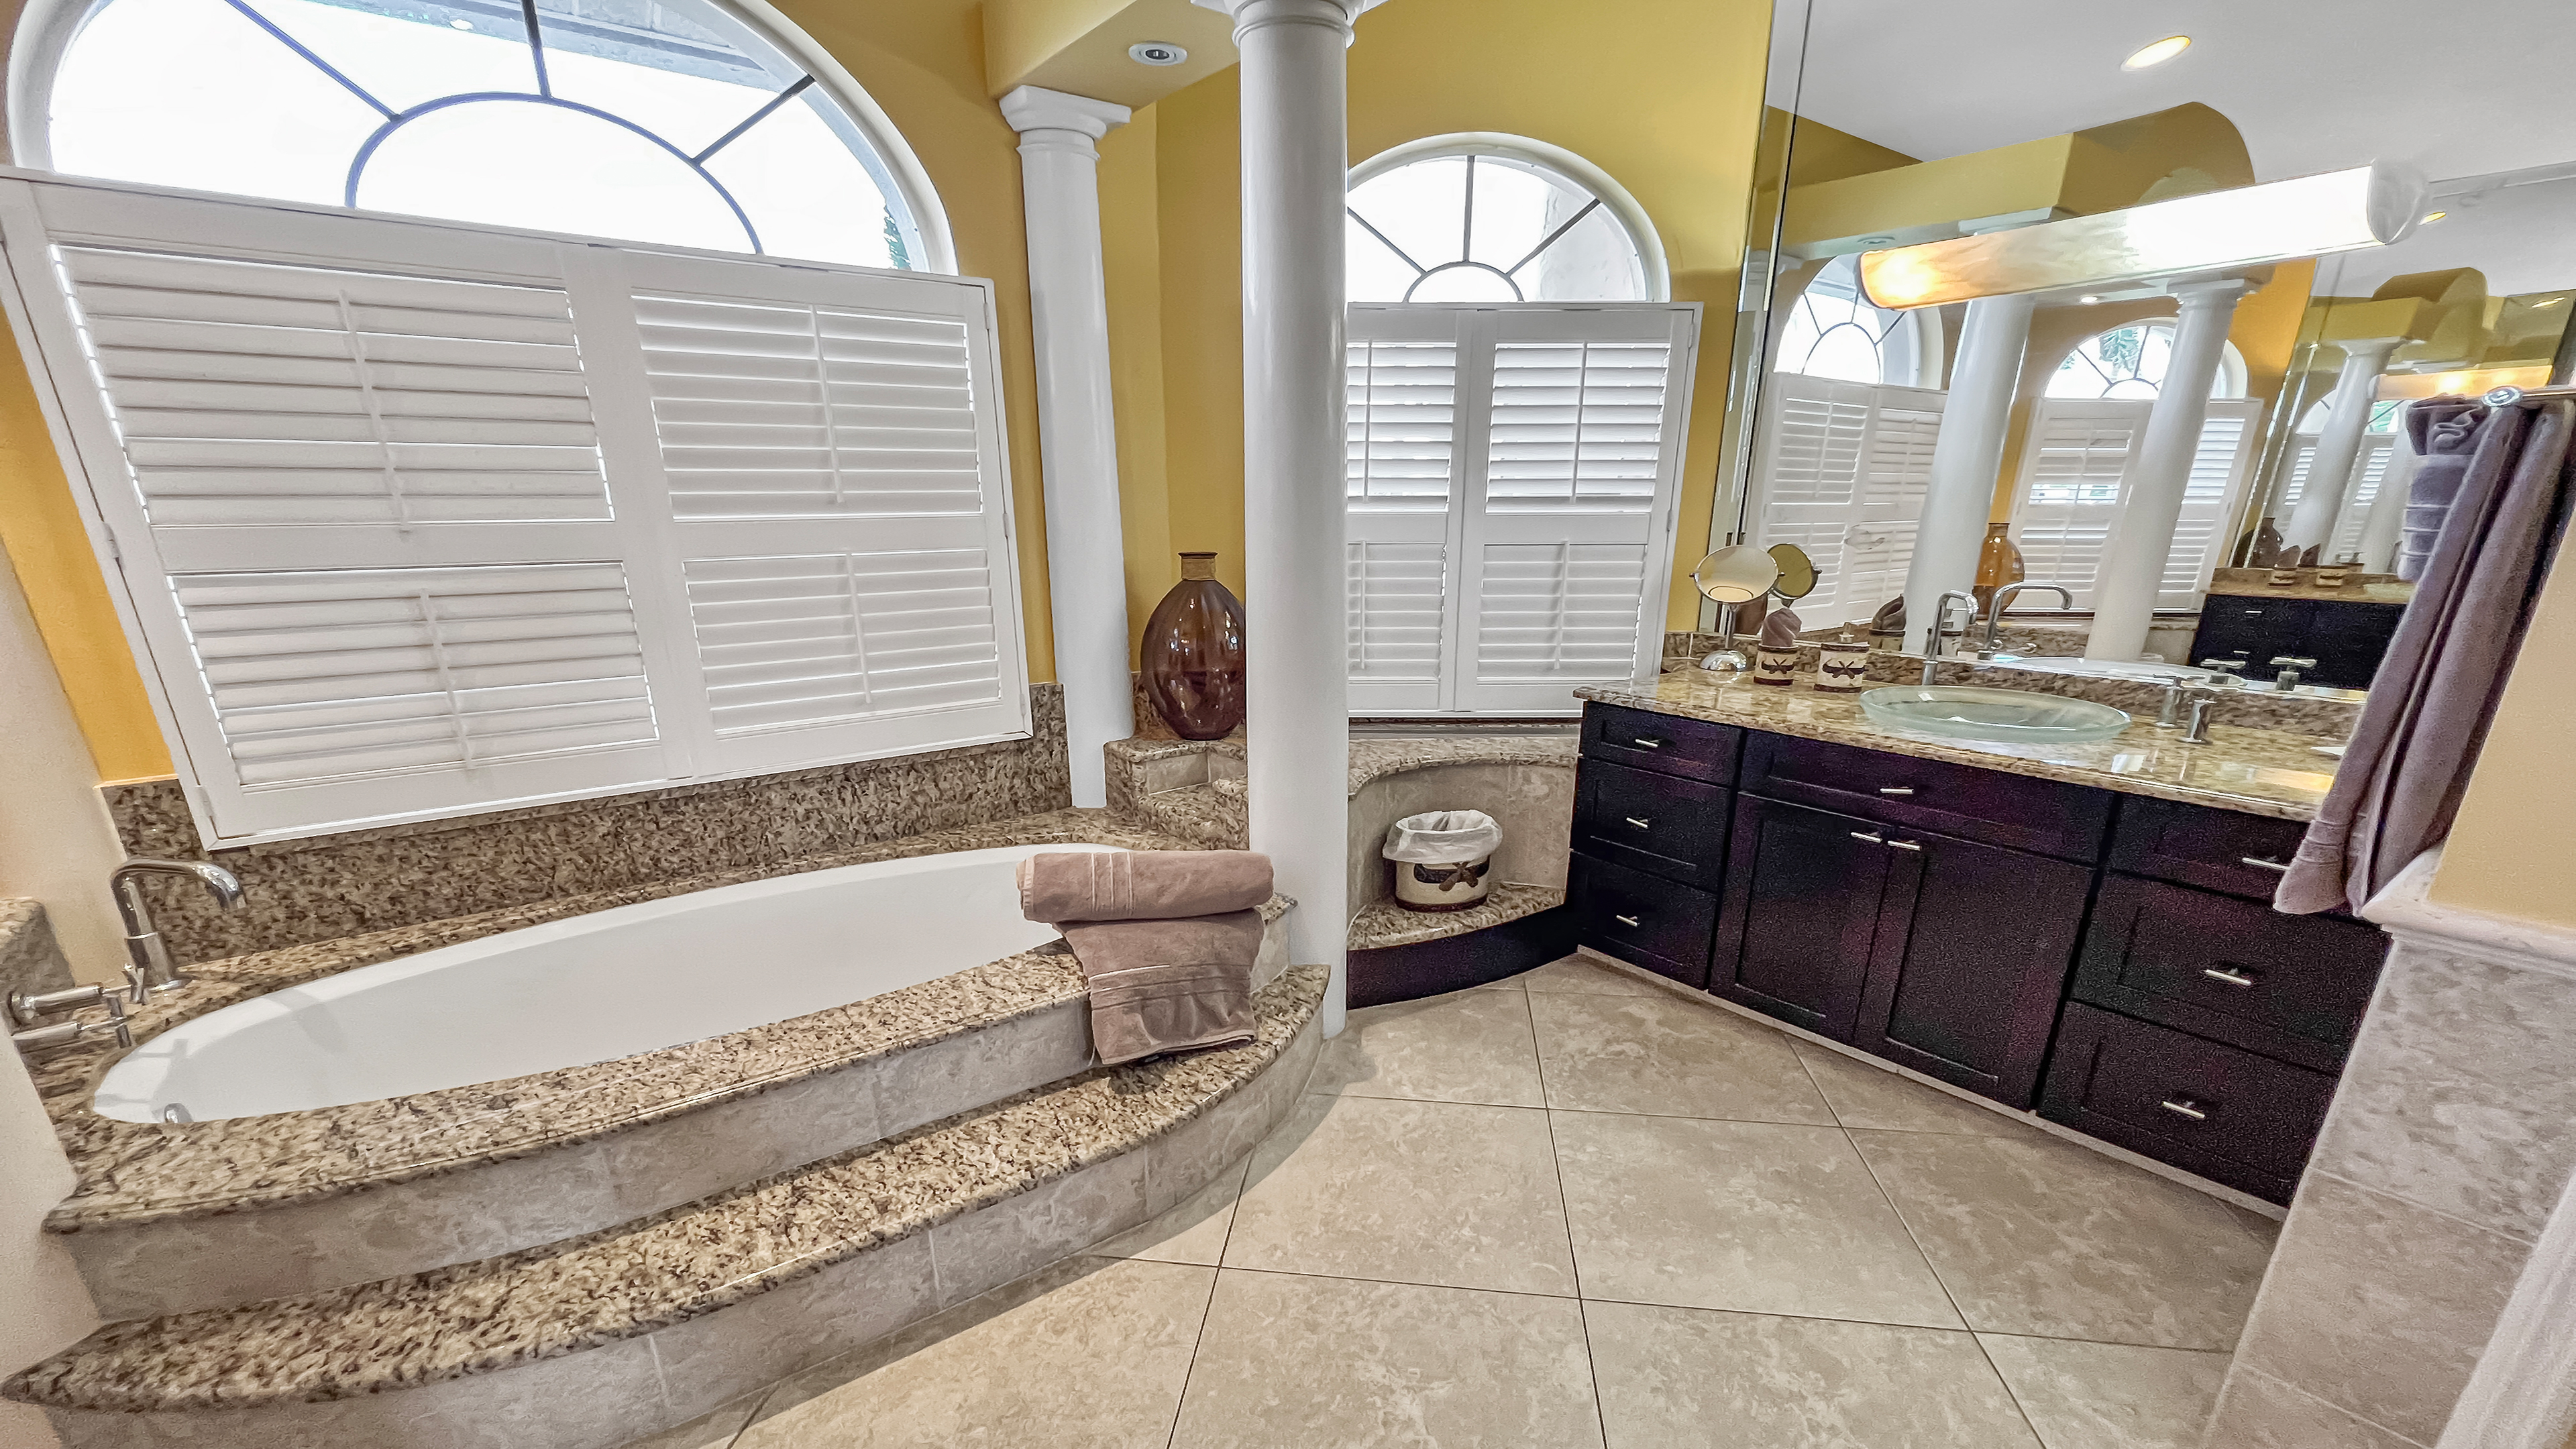 Bath tub surrounded by columns